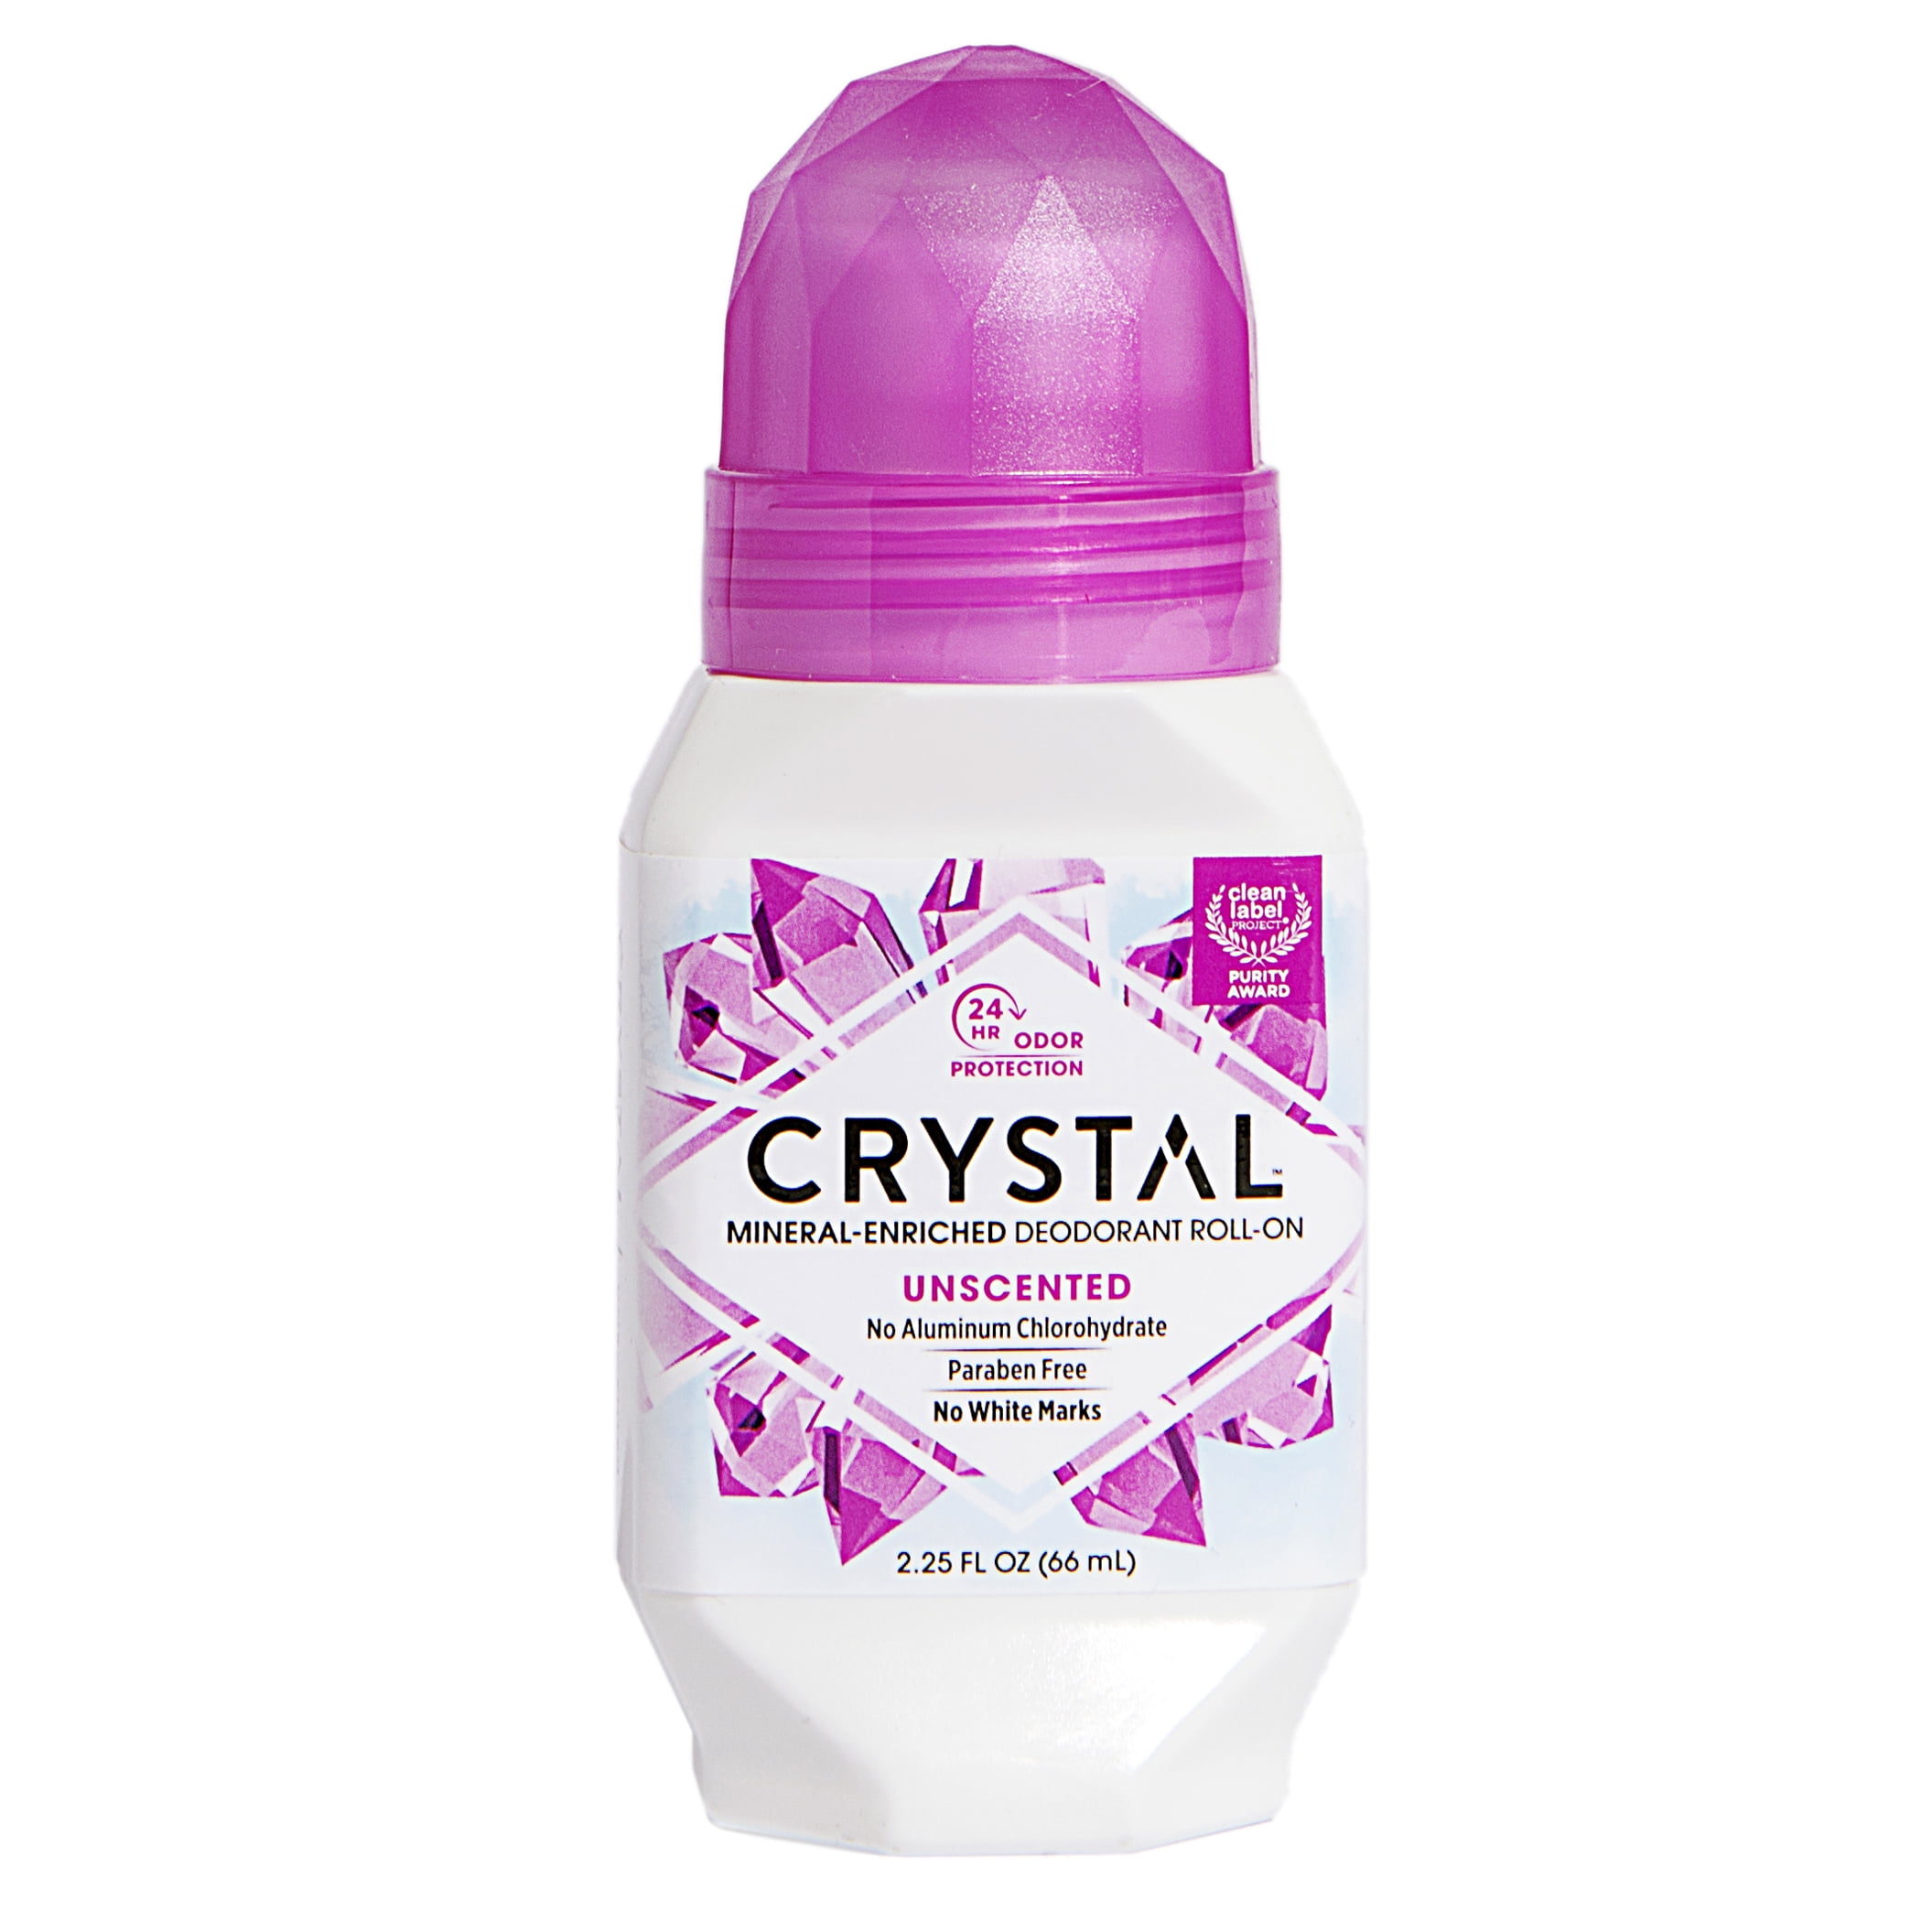 Crystal Body Mineral-Enriched Deodorant Roll-On, Unisex, Unscented, 2.25 fl oz